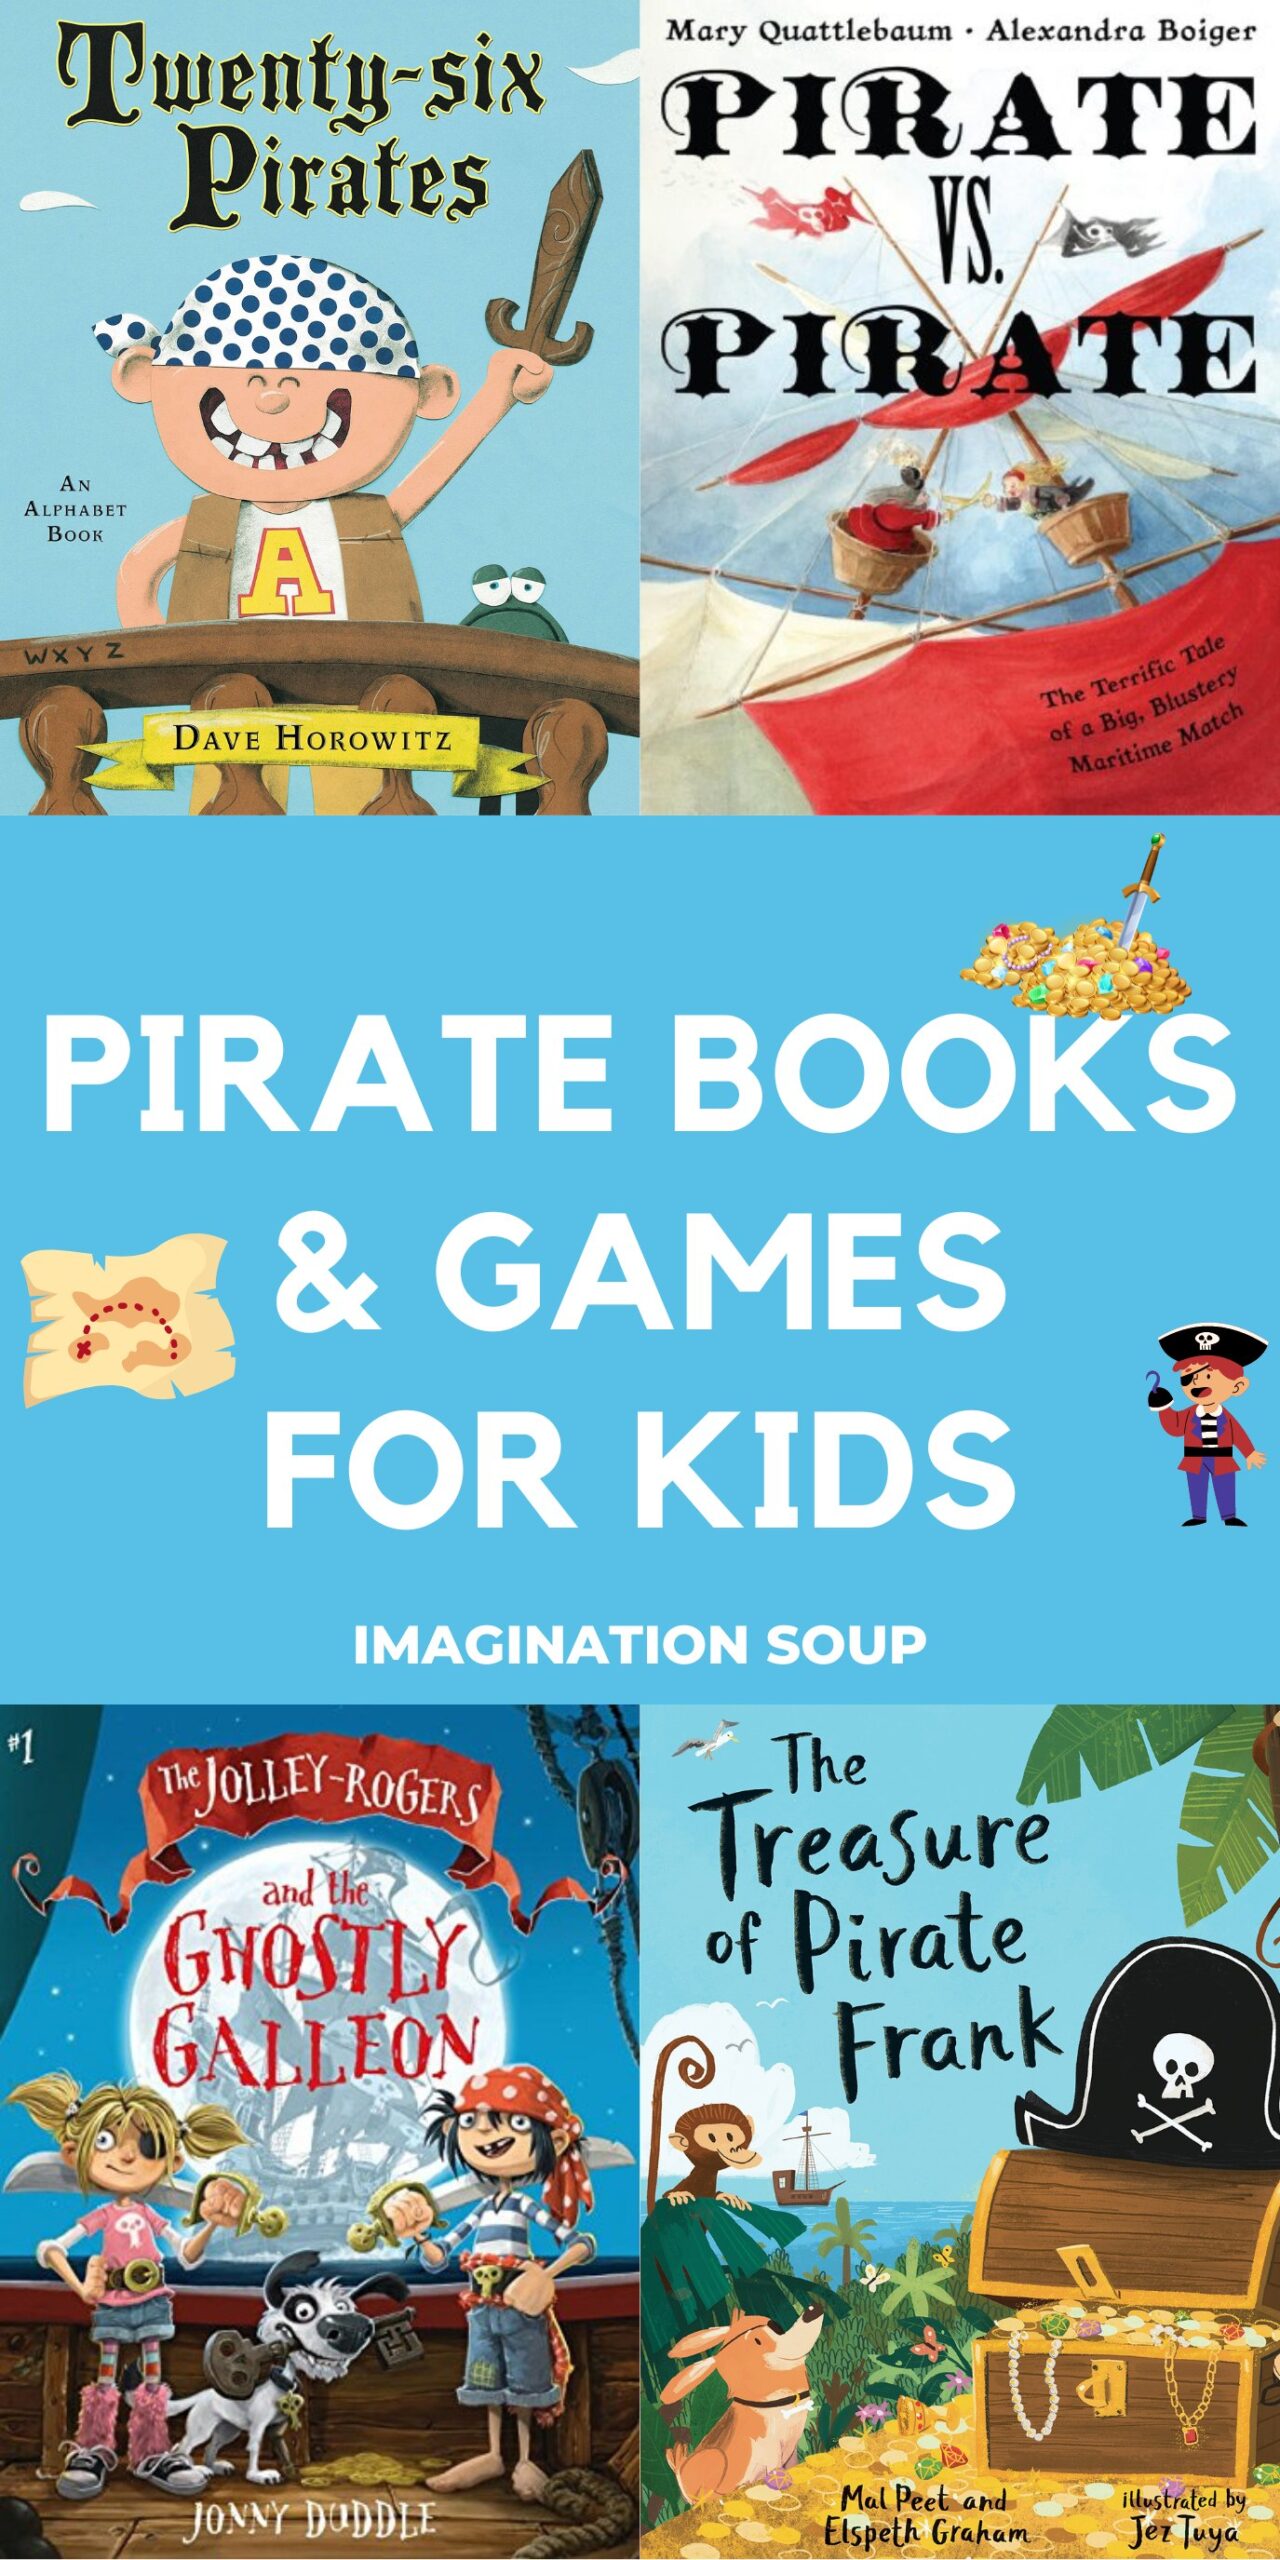 Ahoy! Get your eye patches ready and read the best pirate books, play pirate games, and pretend play pirate. Arrrrrg.